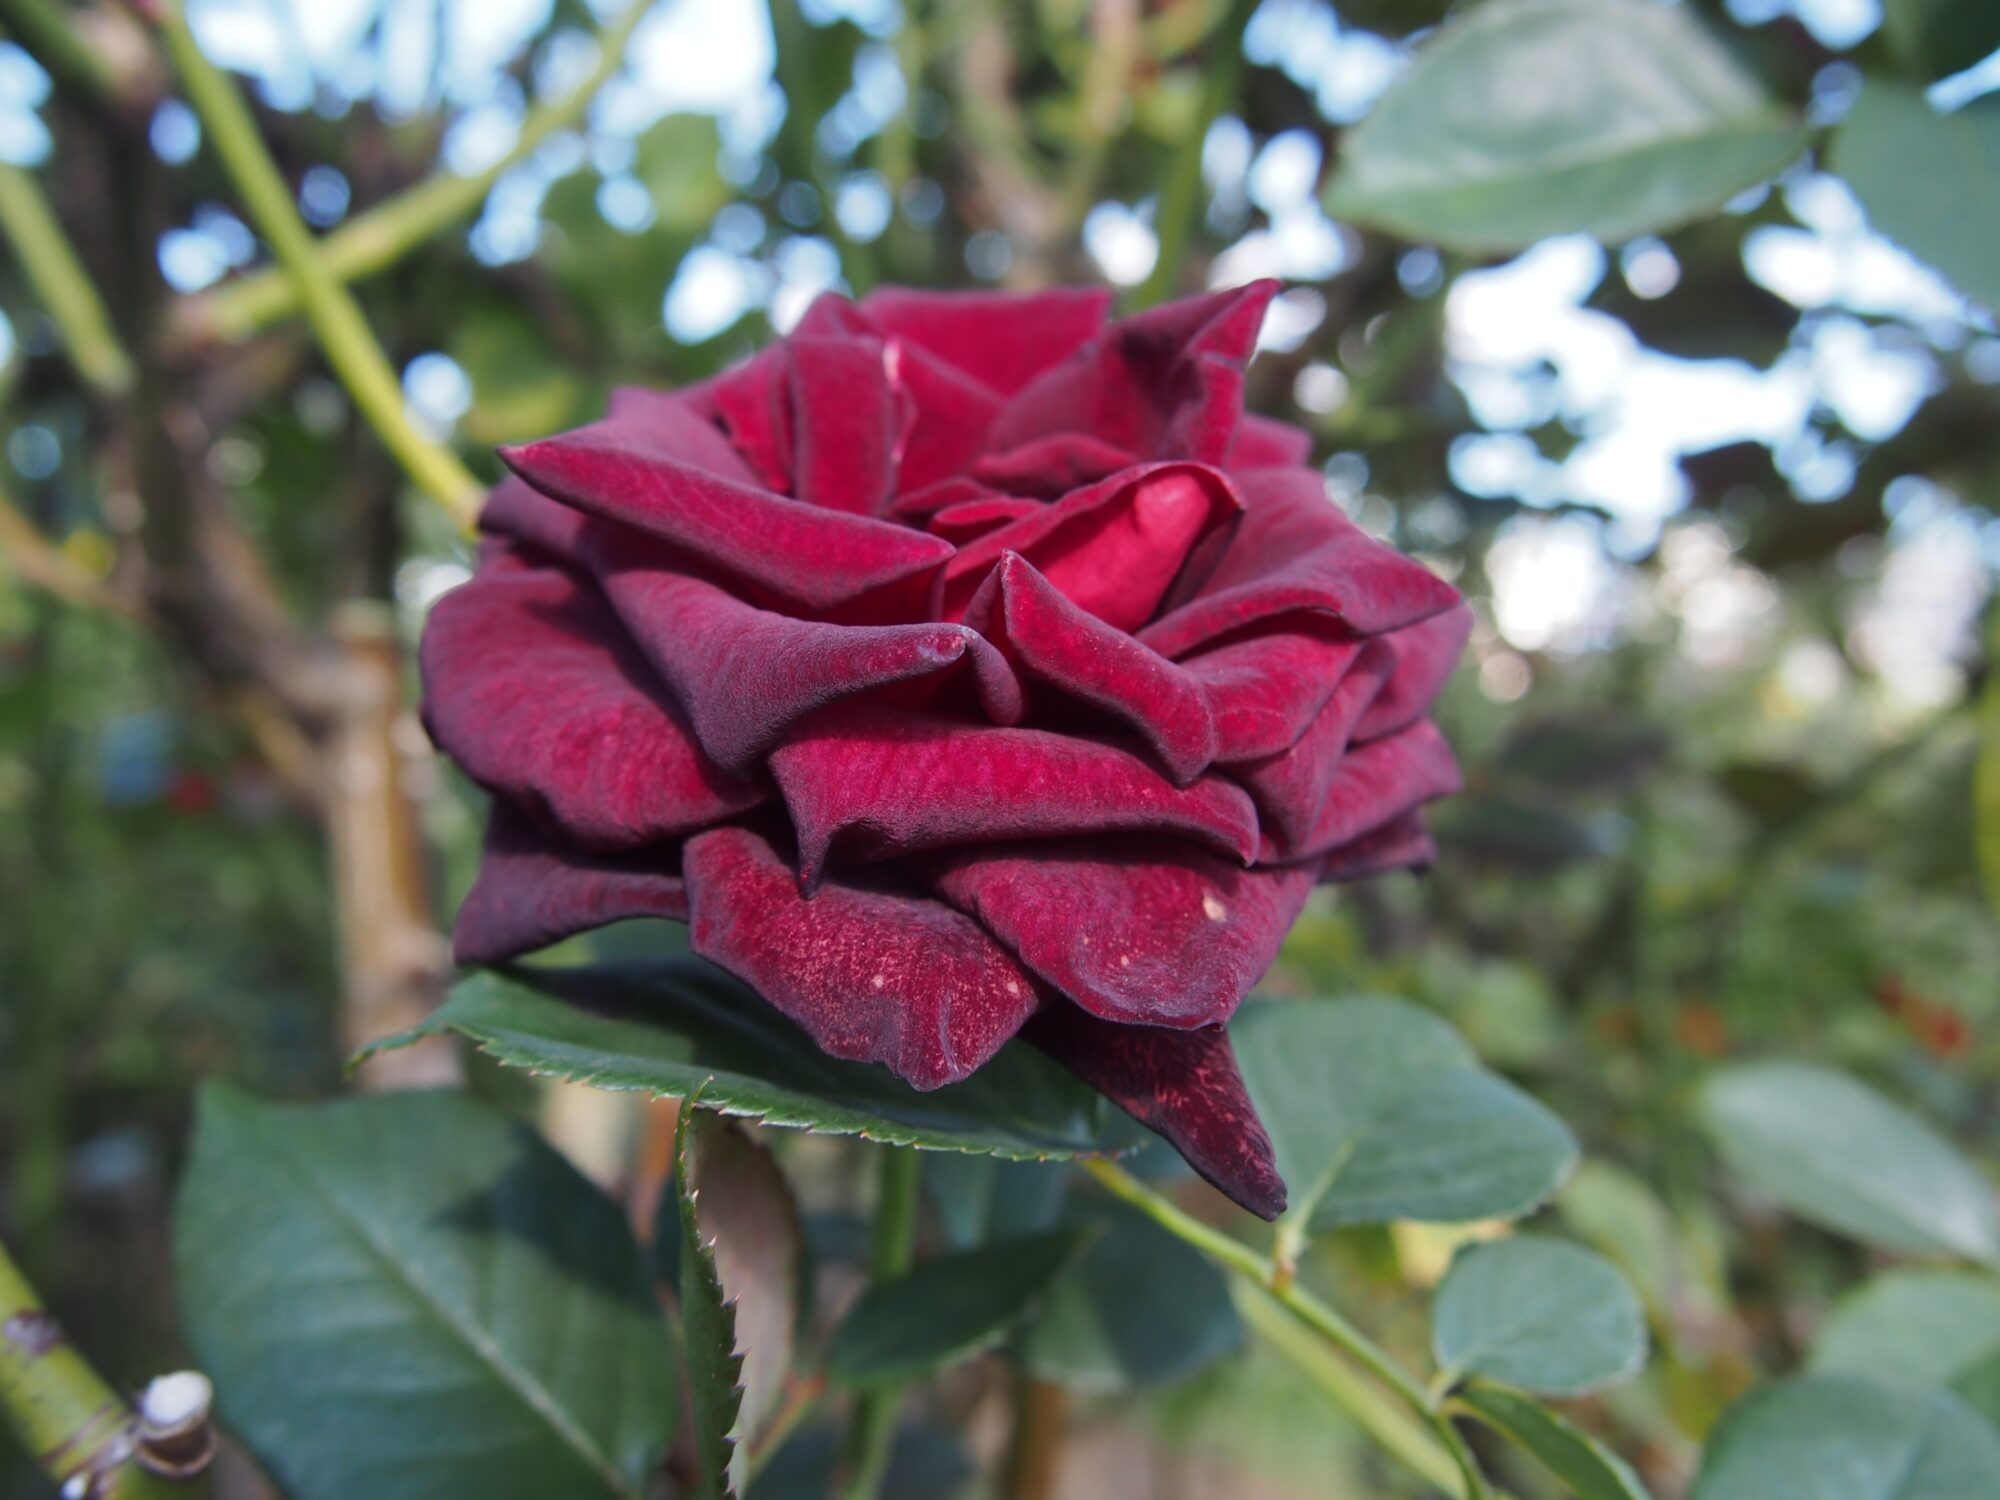 Velvety deep burgundy 'Black Baccara' rose, almost black in hue, with rich green leaves.